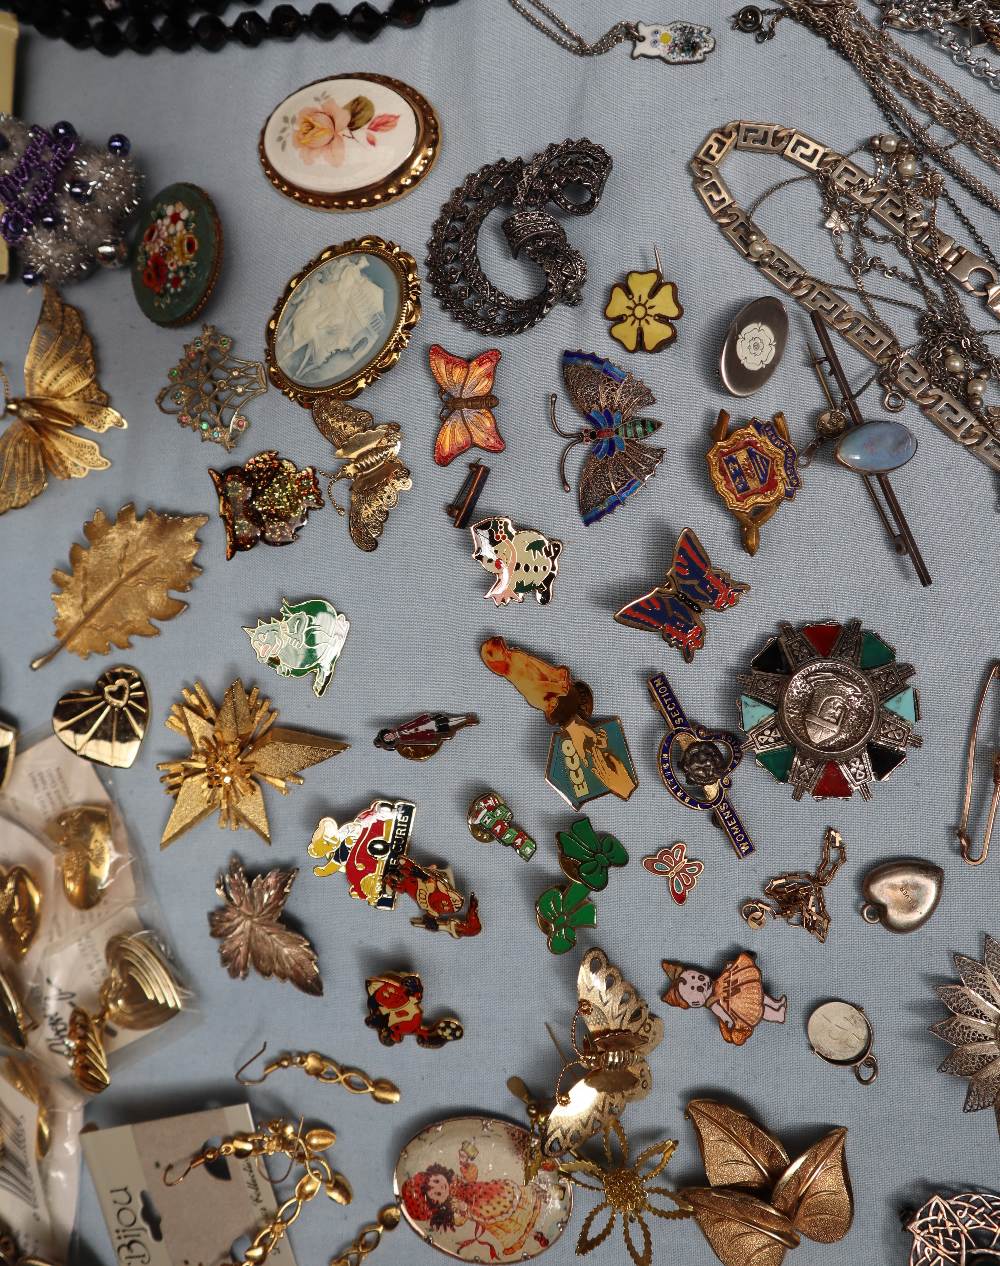 A large collection of costume jewellery including earrings, faux pearl necklaces, rings, medallions, - Image 4 of 7